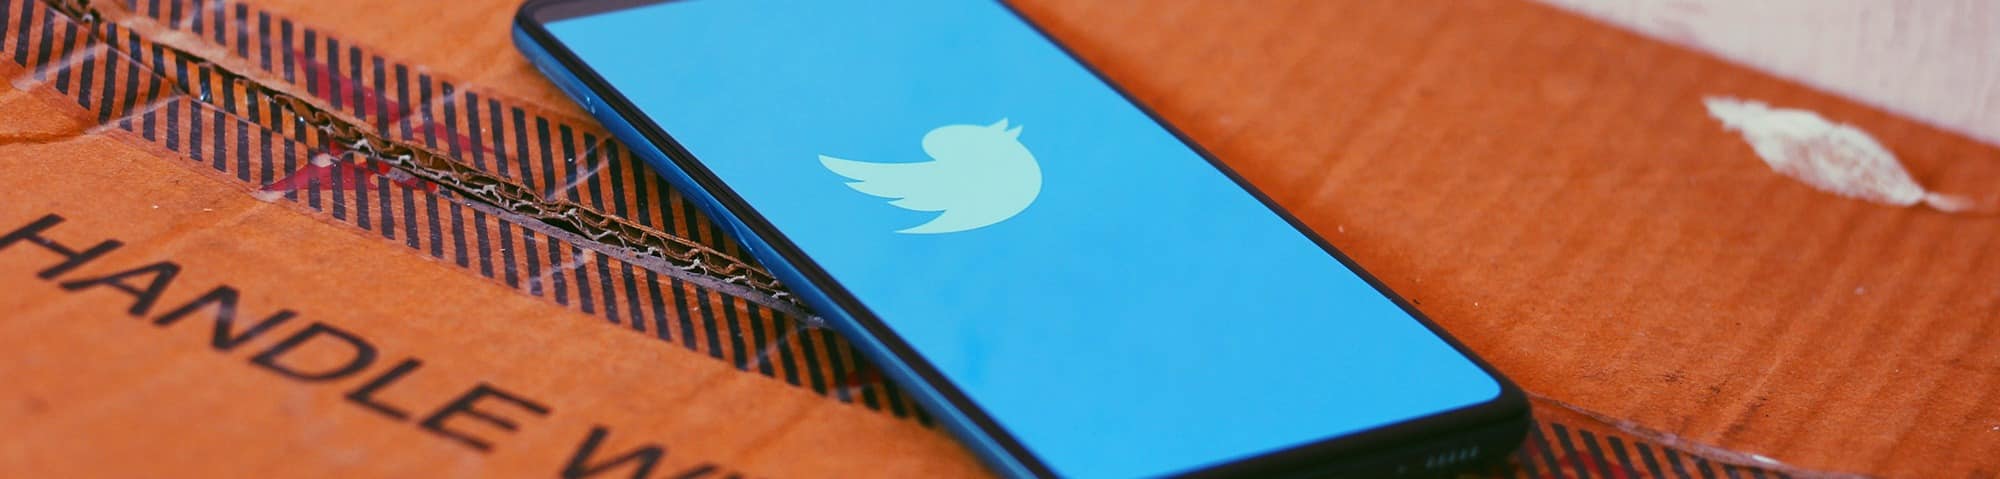 Why Twitter Is So Important For Your Business